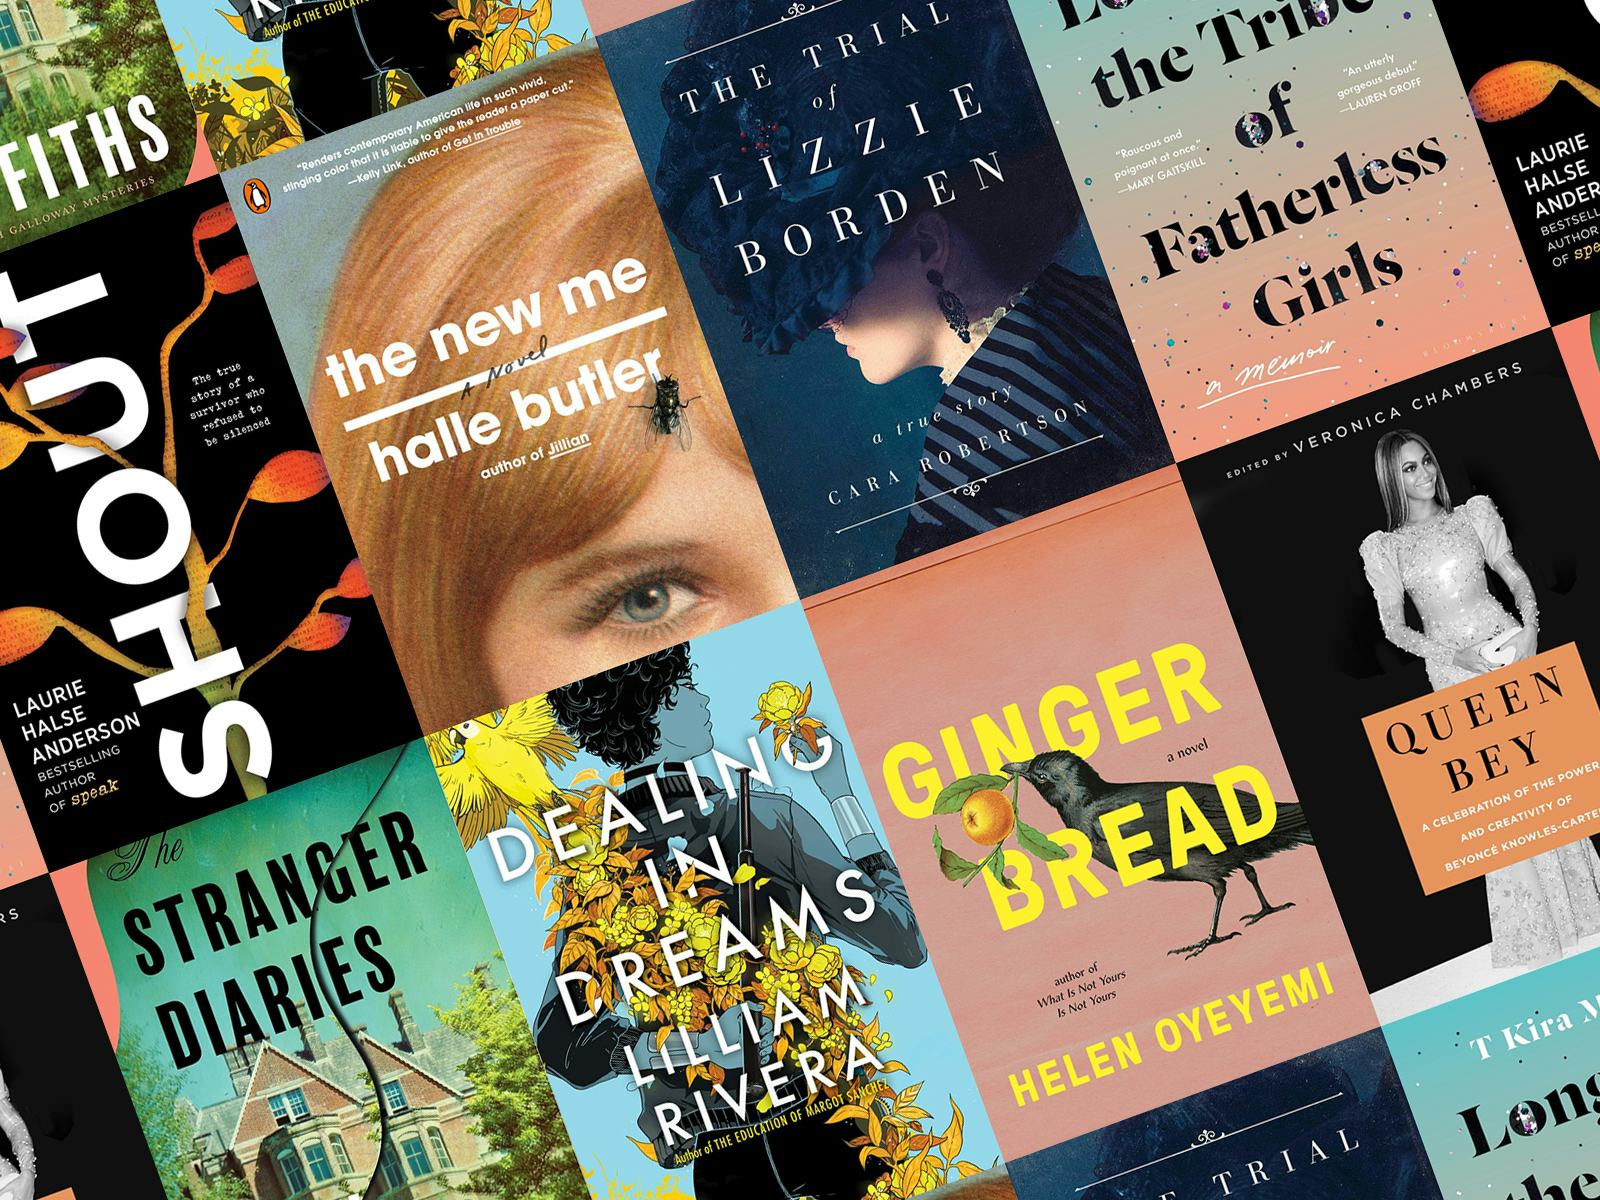 33 New Books Coming Out In March 2019 To Add To Your Spring Reading List